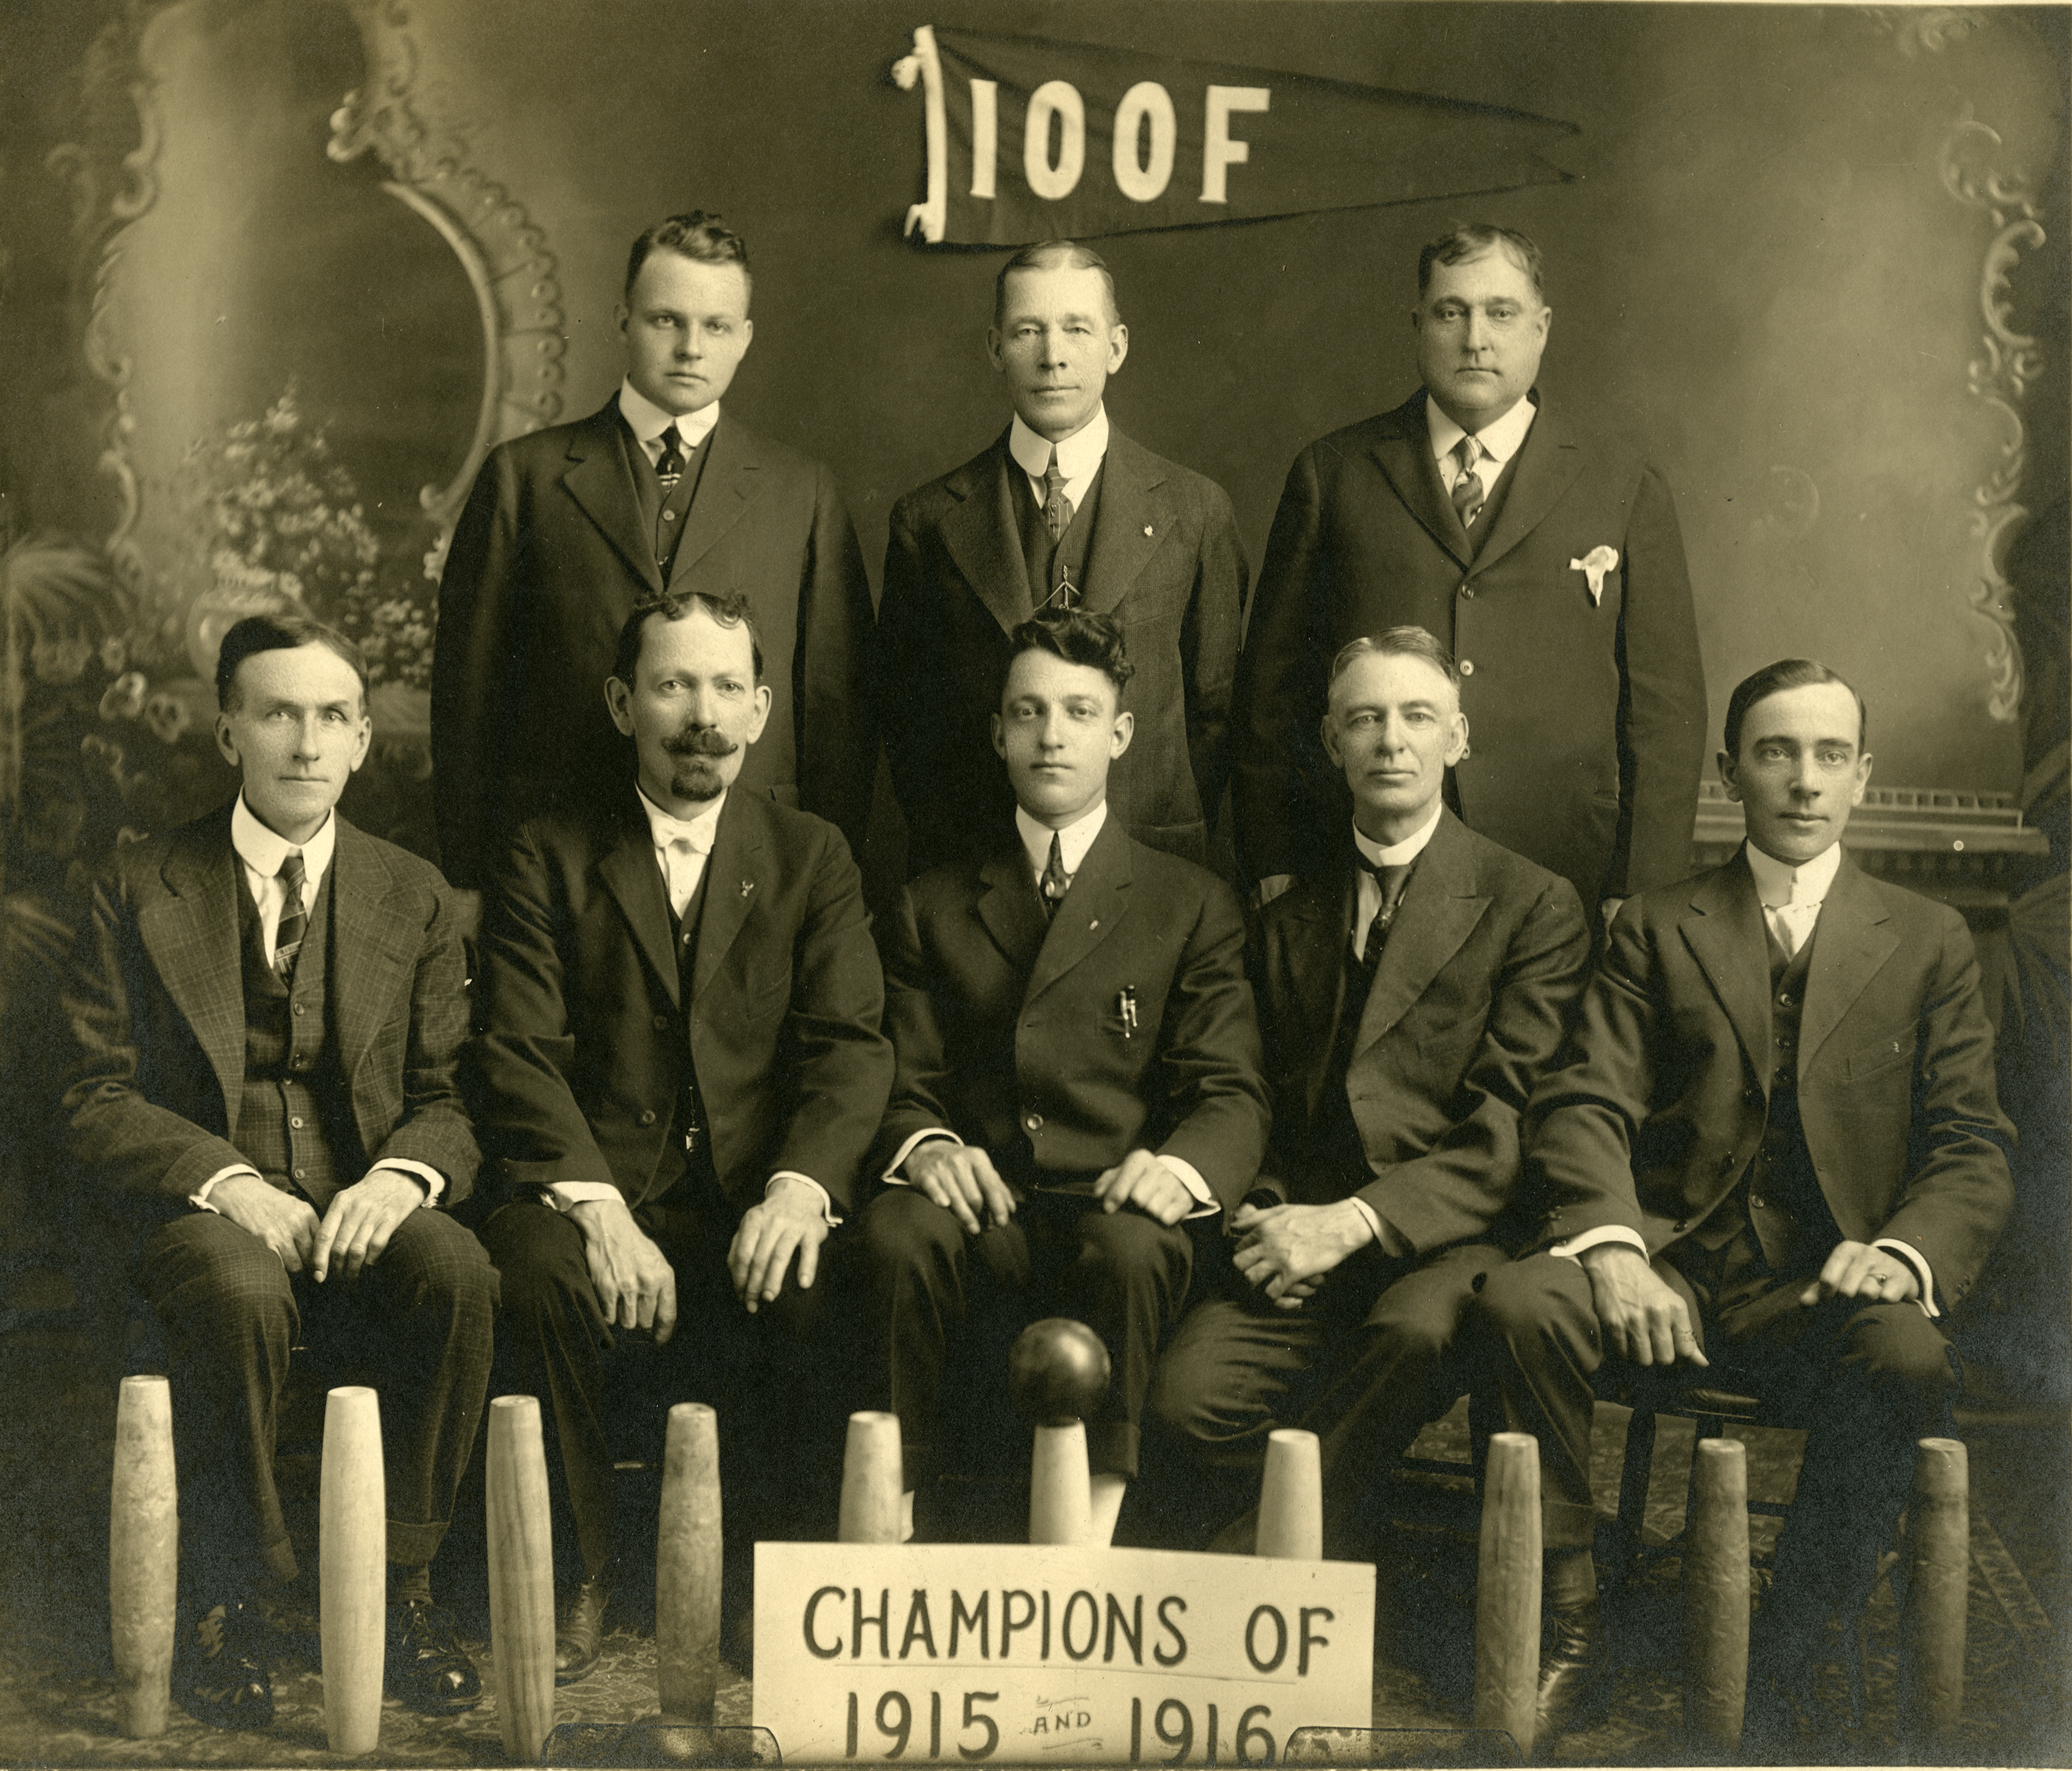 IOOF-bowling-champs-1915